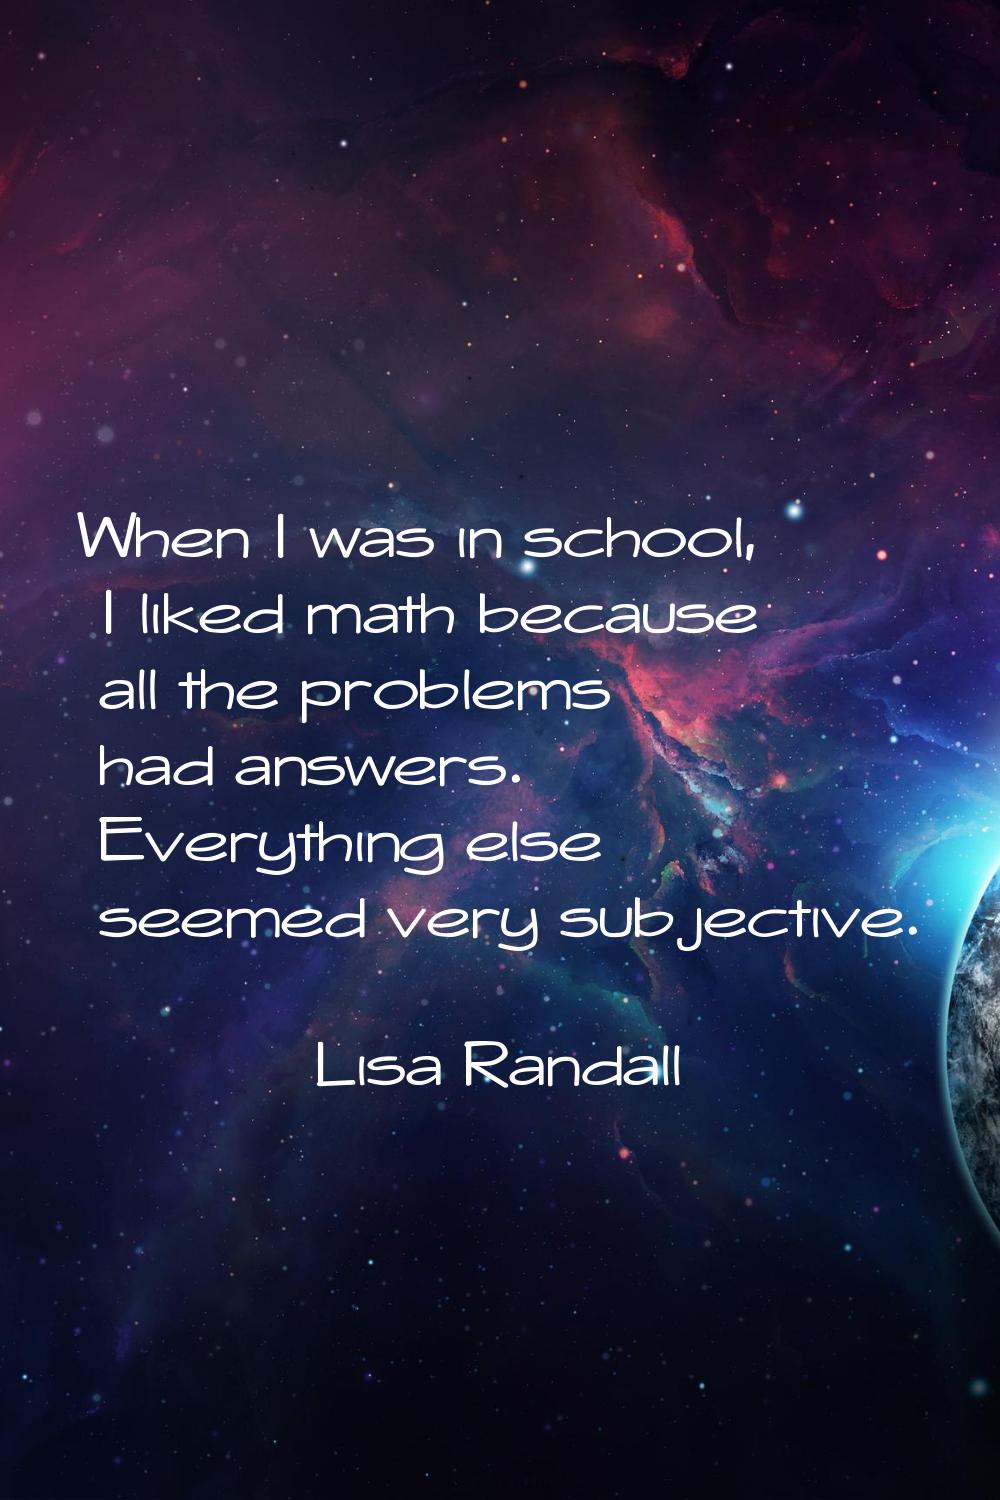 When I was in school, I liked math because all the problems had answers. Everything else seemed ver